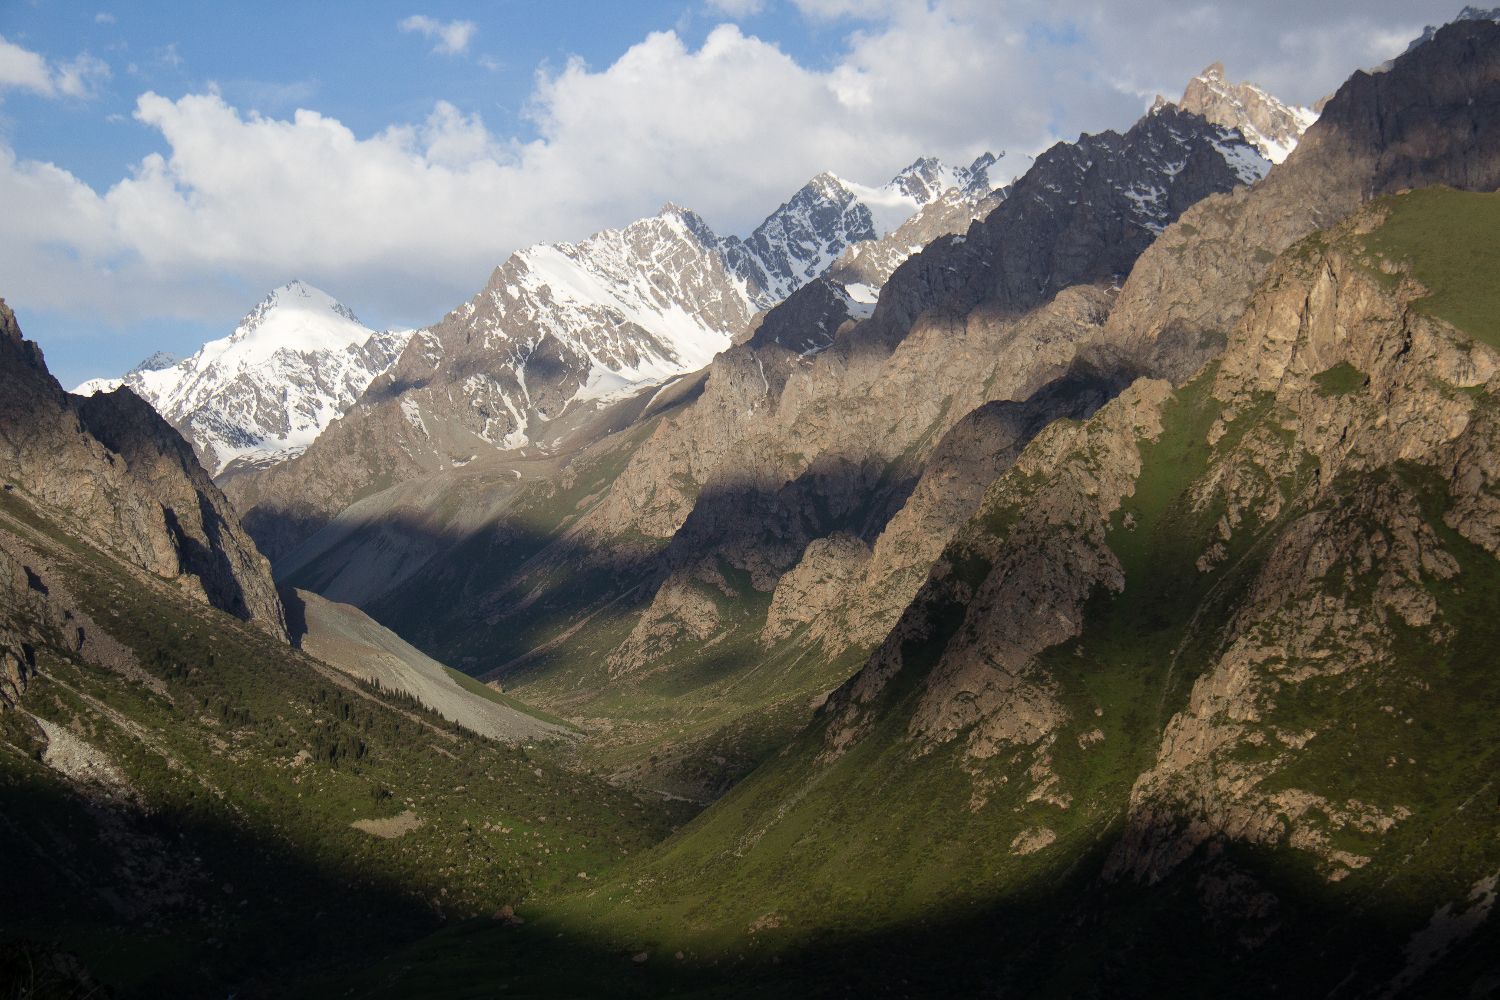 Hiking Kyrgyzstan: a trekker's guide to the Tien Shan